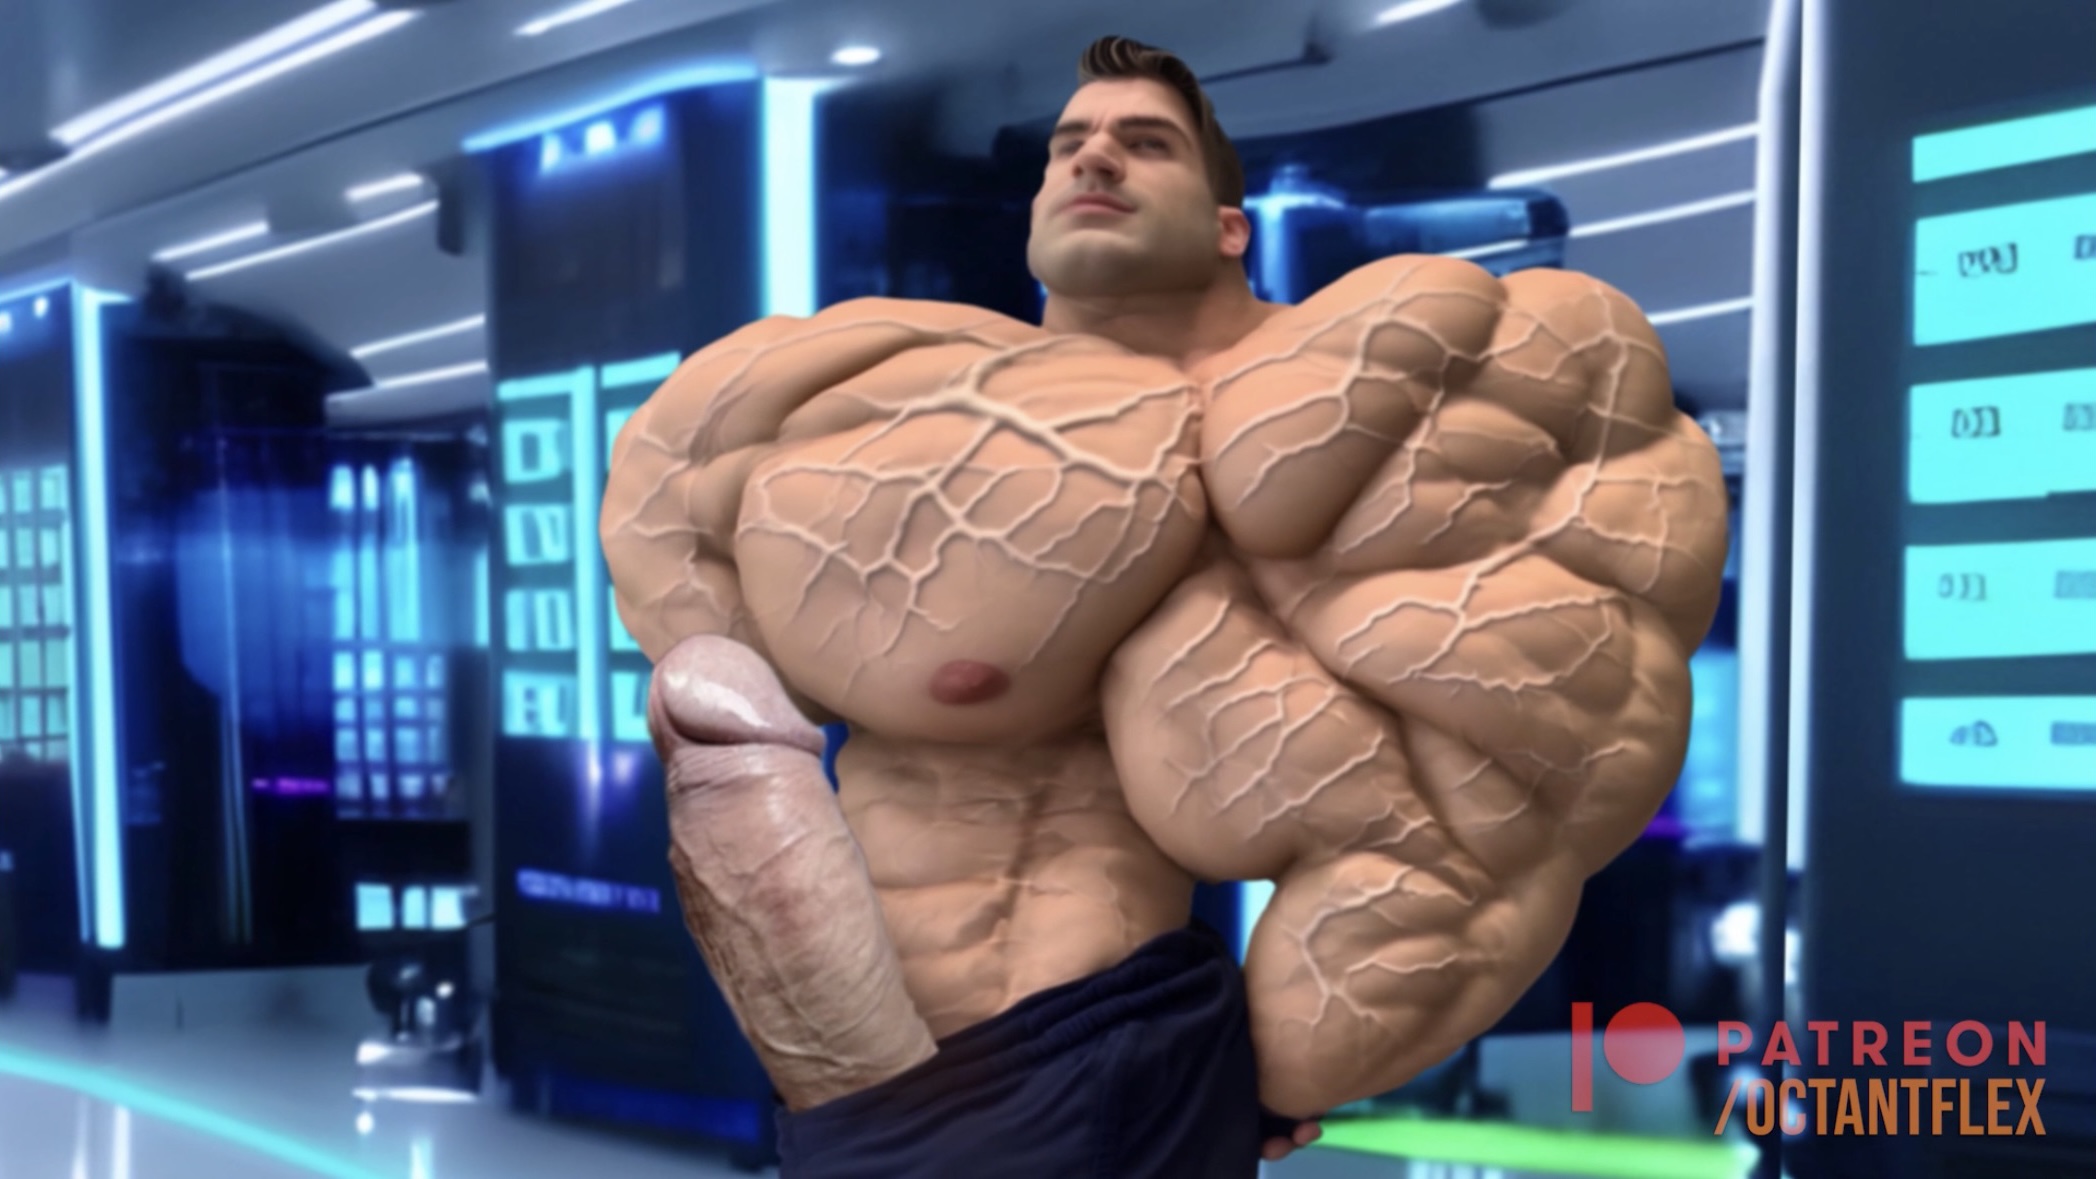 Giants: Huge Bodybuilder Muscle Growth and Cockâ€¦ ThisVid.com